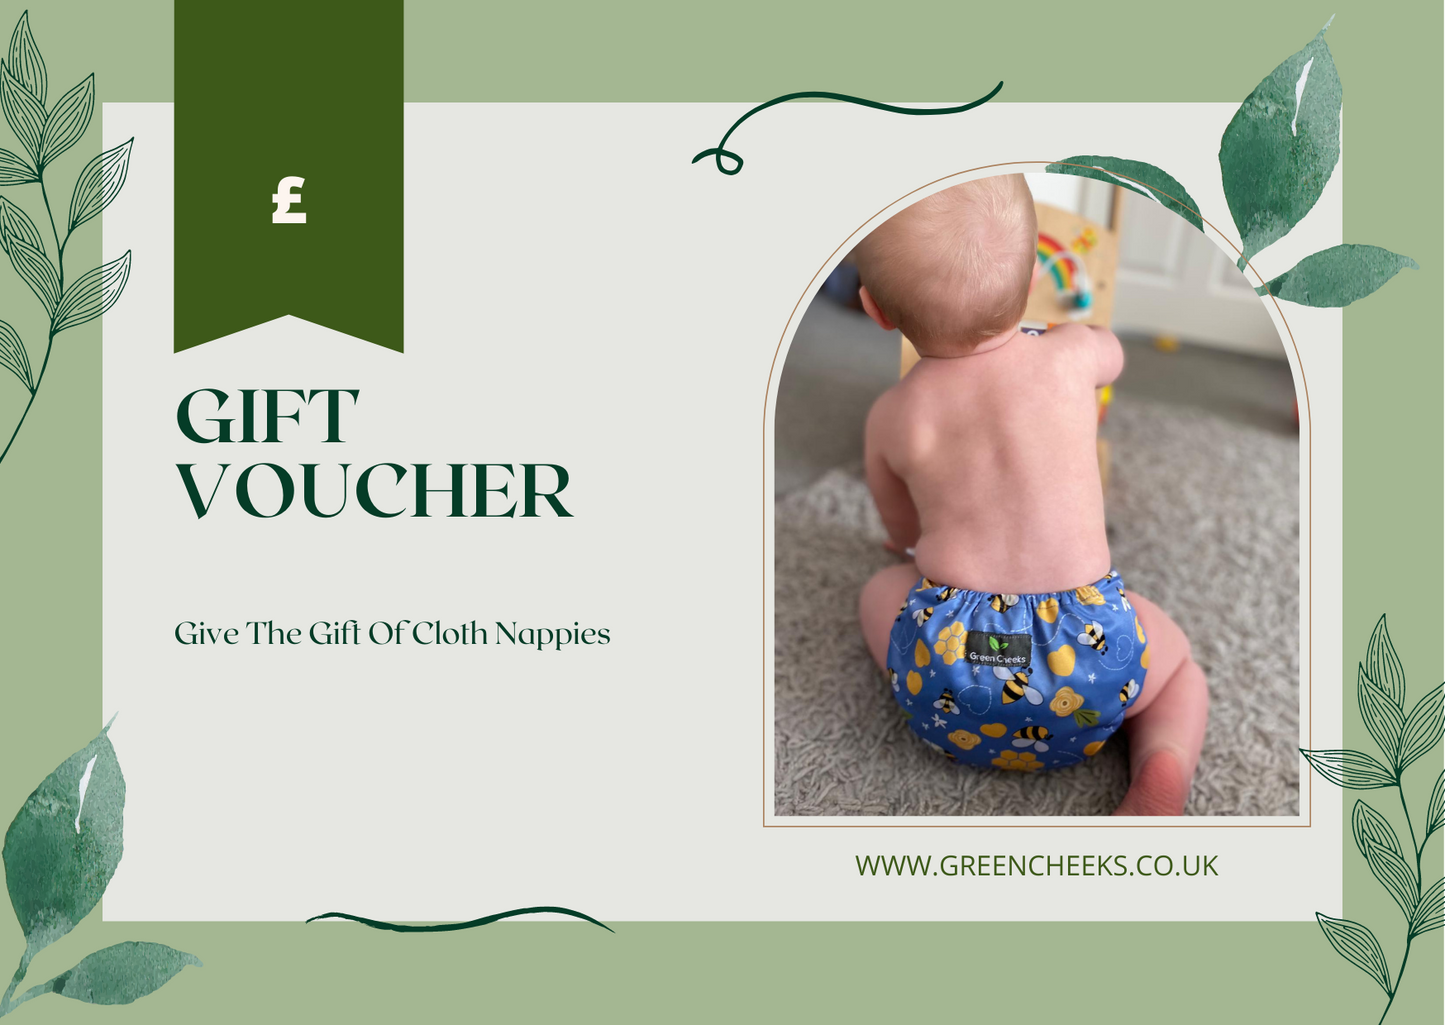 A gift voucher delivered digitally to spend on cloth nappies 